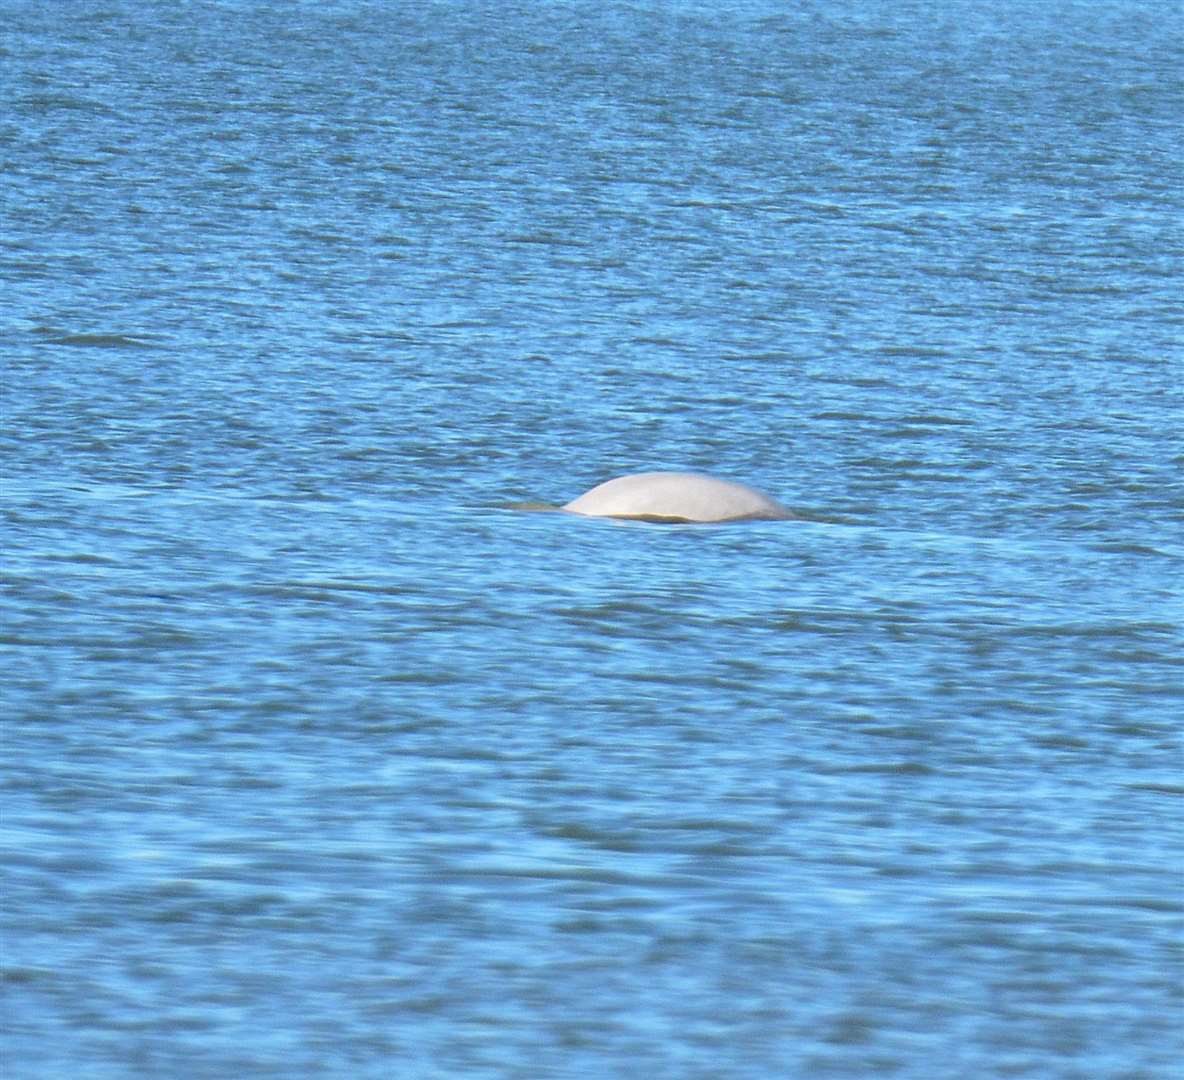 The whale poked its head out of the water. Picture: Jason Arthur